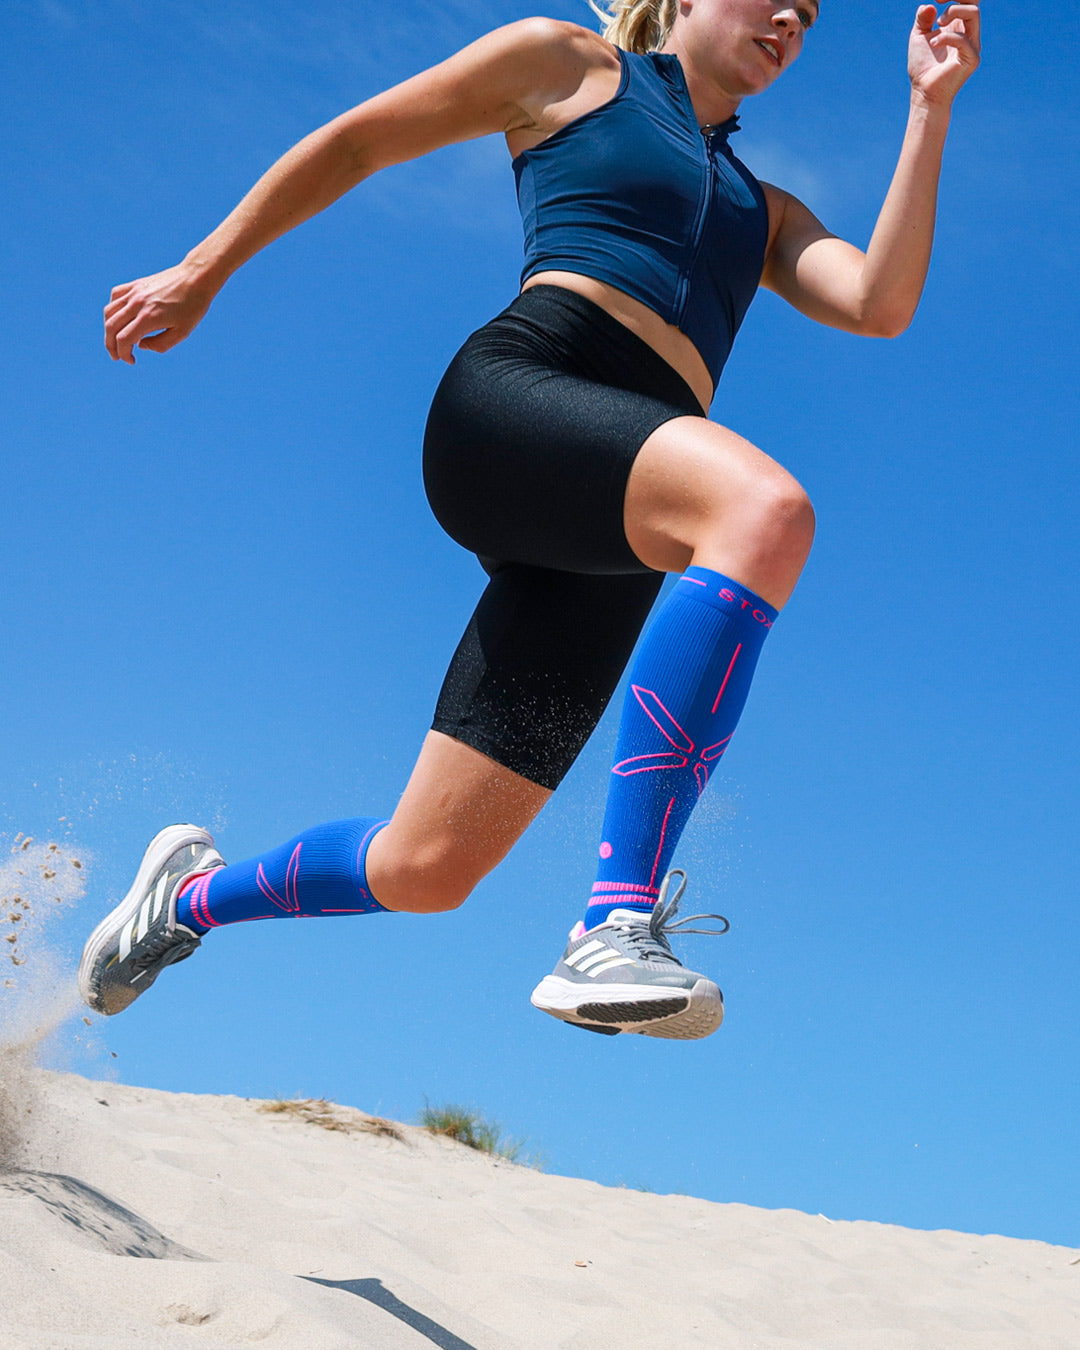 The Best Compression Stockings: No More Hot Feet During The Summer